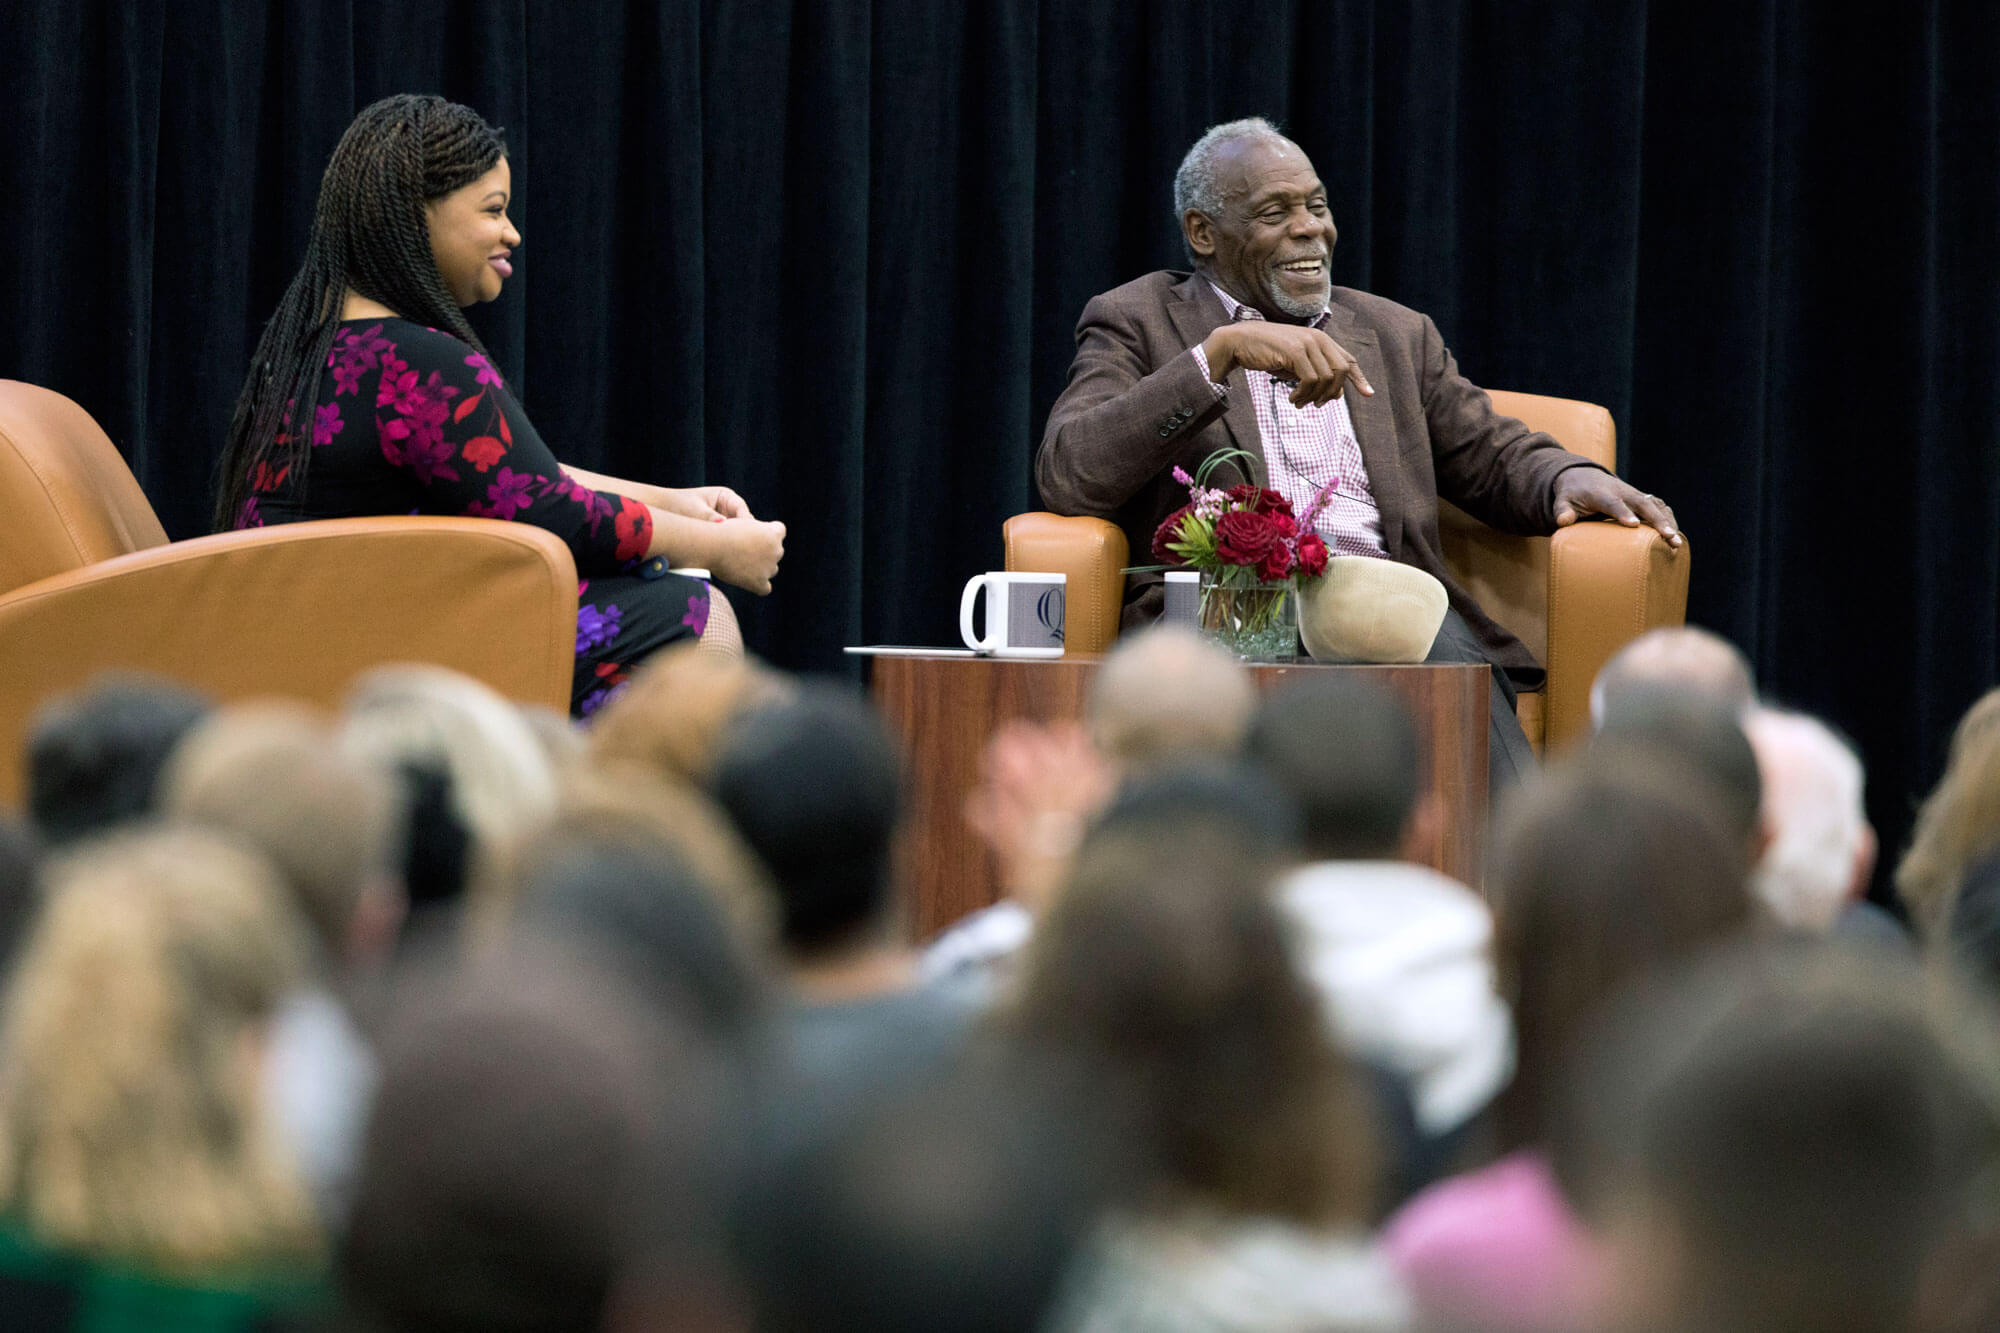 Danny Glover and Khalilah Brown-Dean speak on stage in front of an audience.